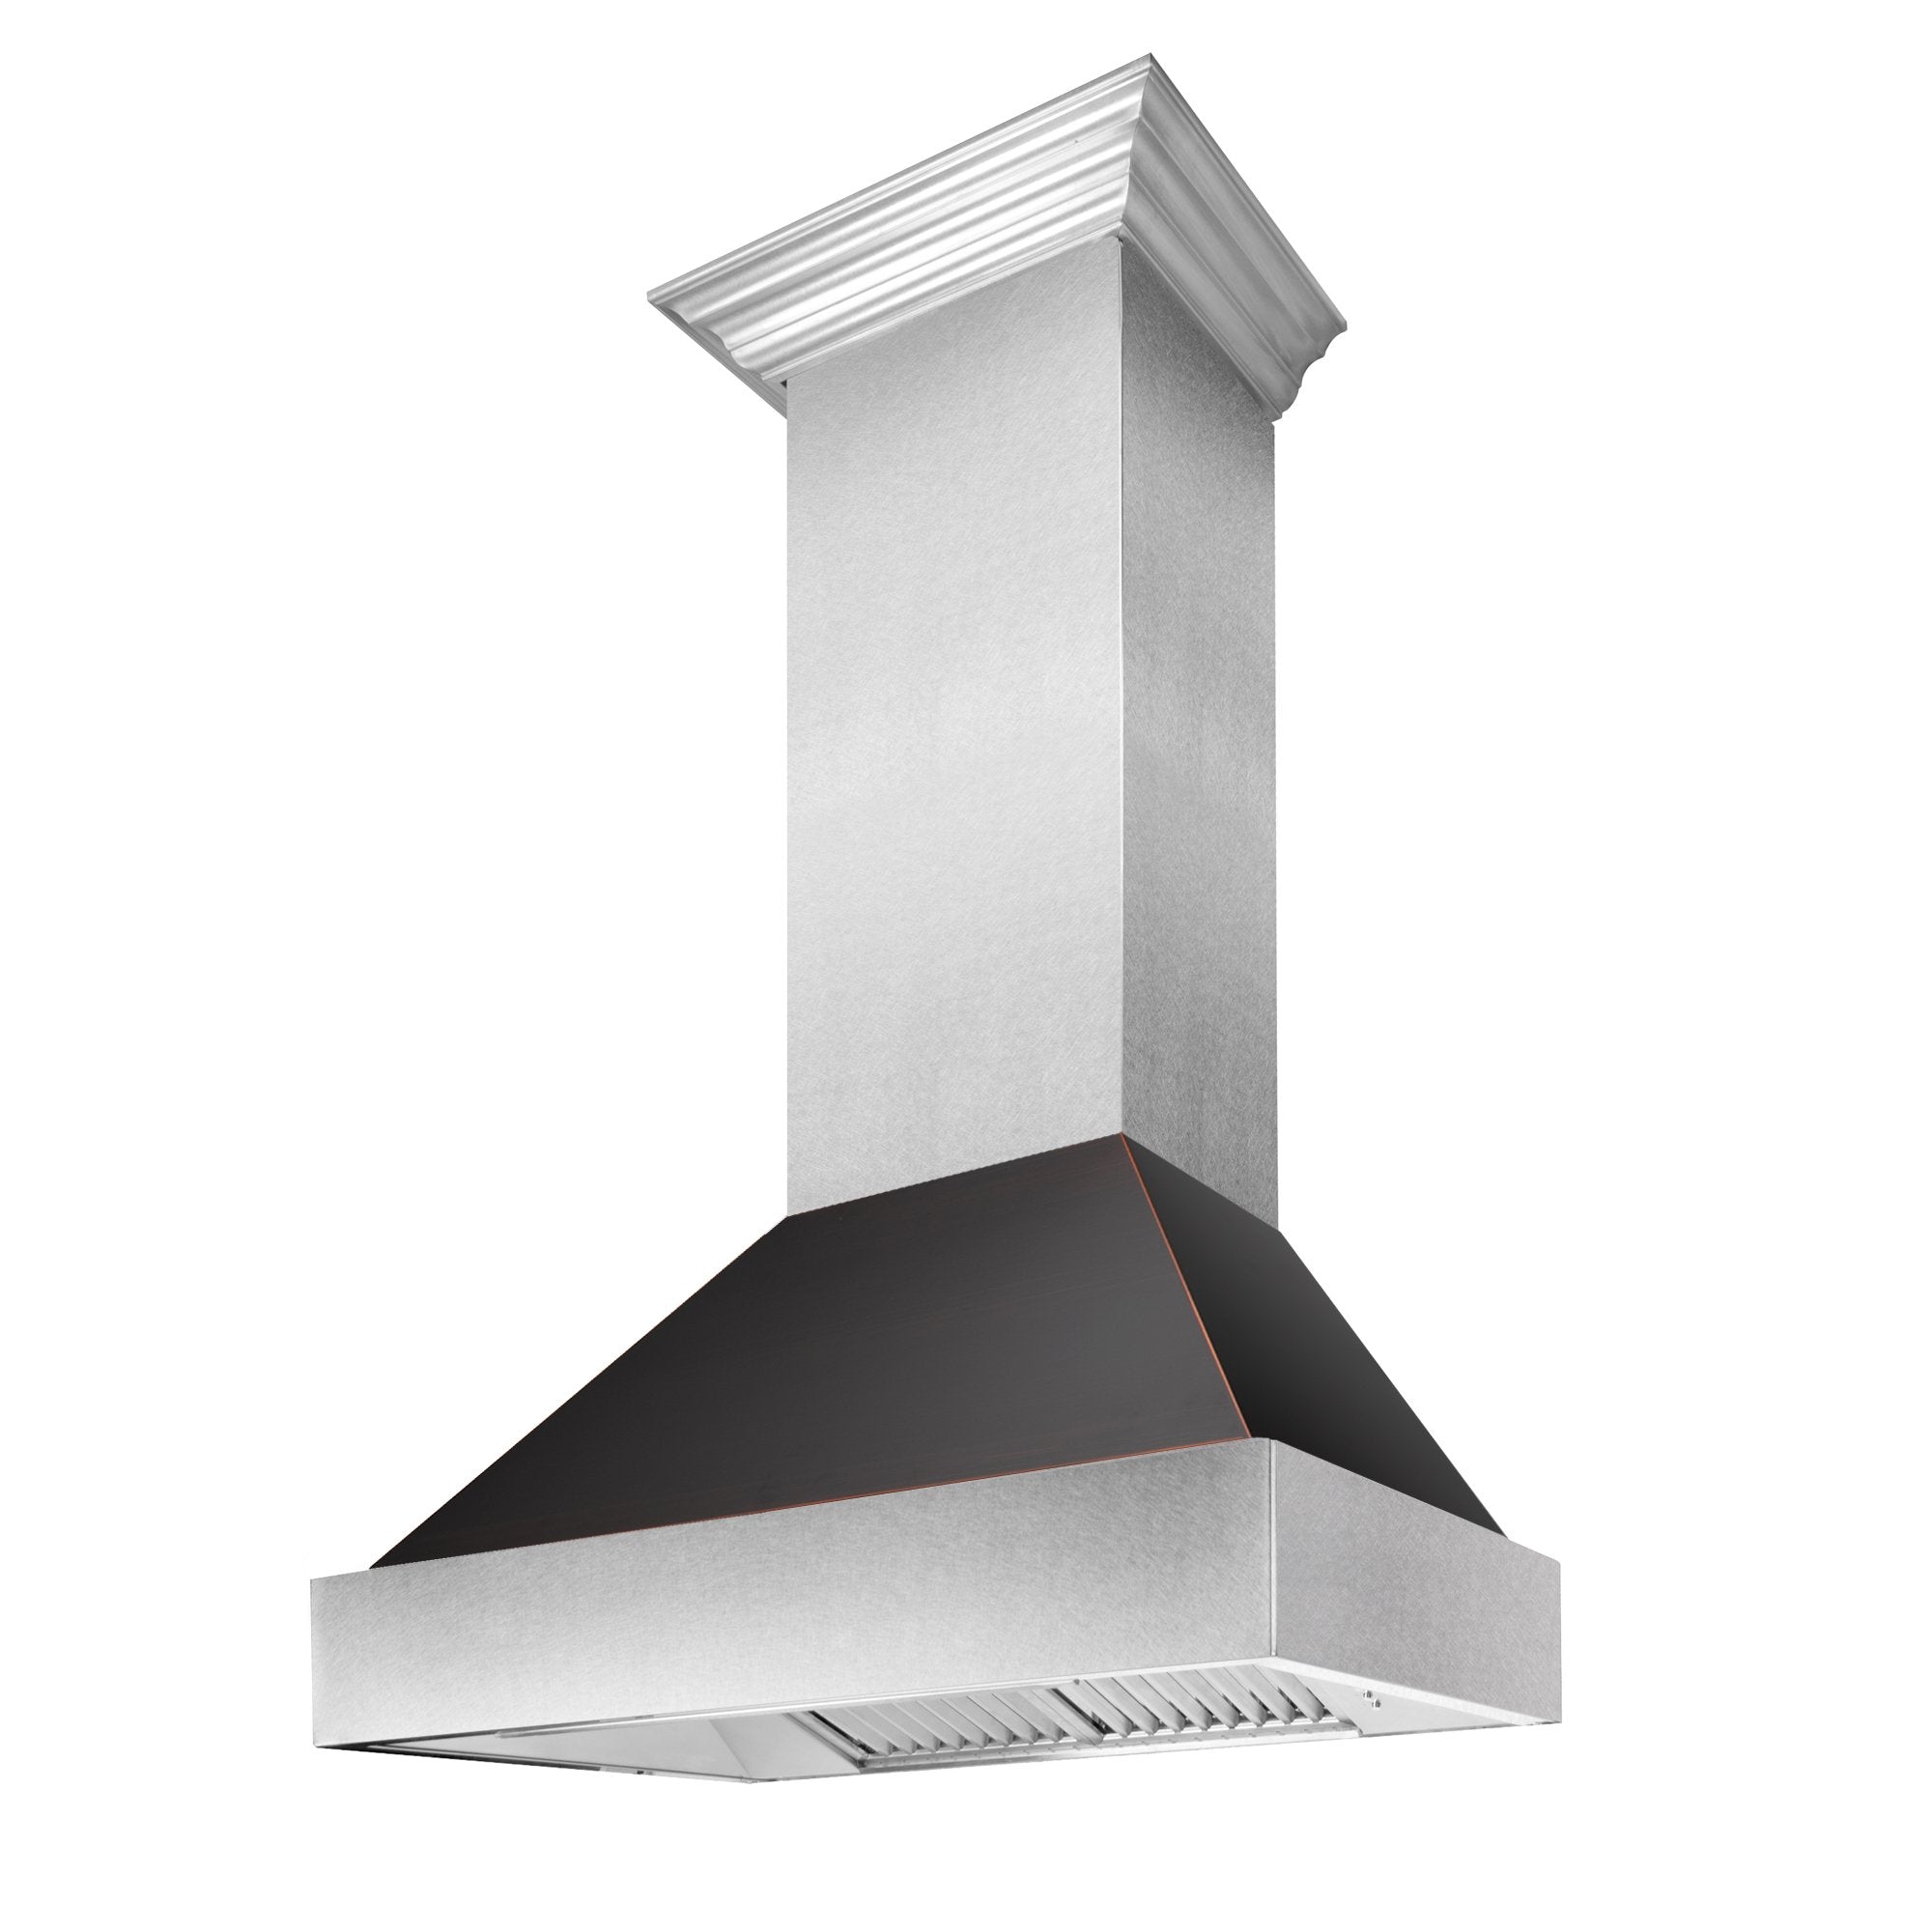 36" Ducted Fingerprint Resistant Stainless Steel Range Hood with Oil Rubbed Bronze Shell (8654ORB-36)